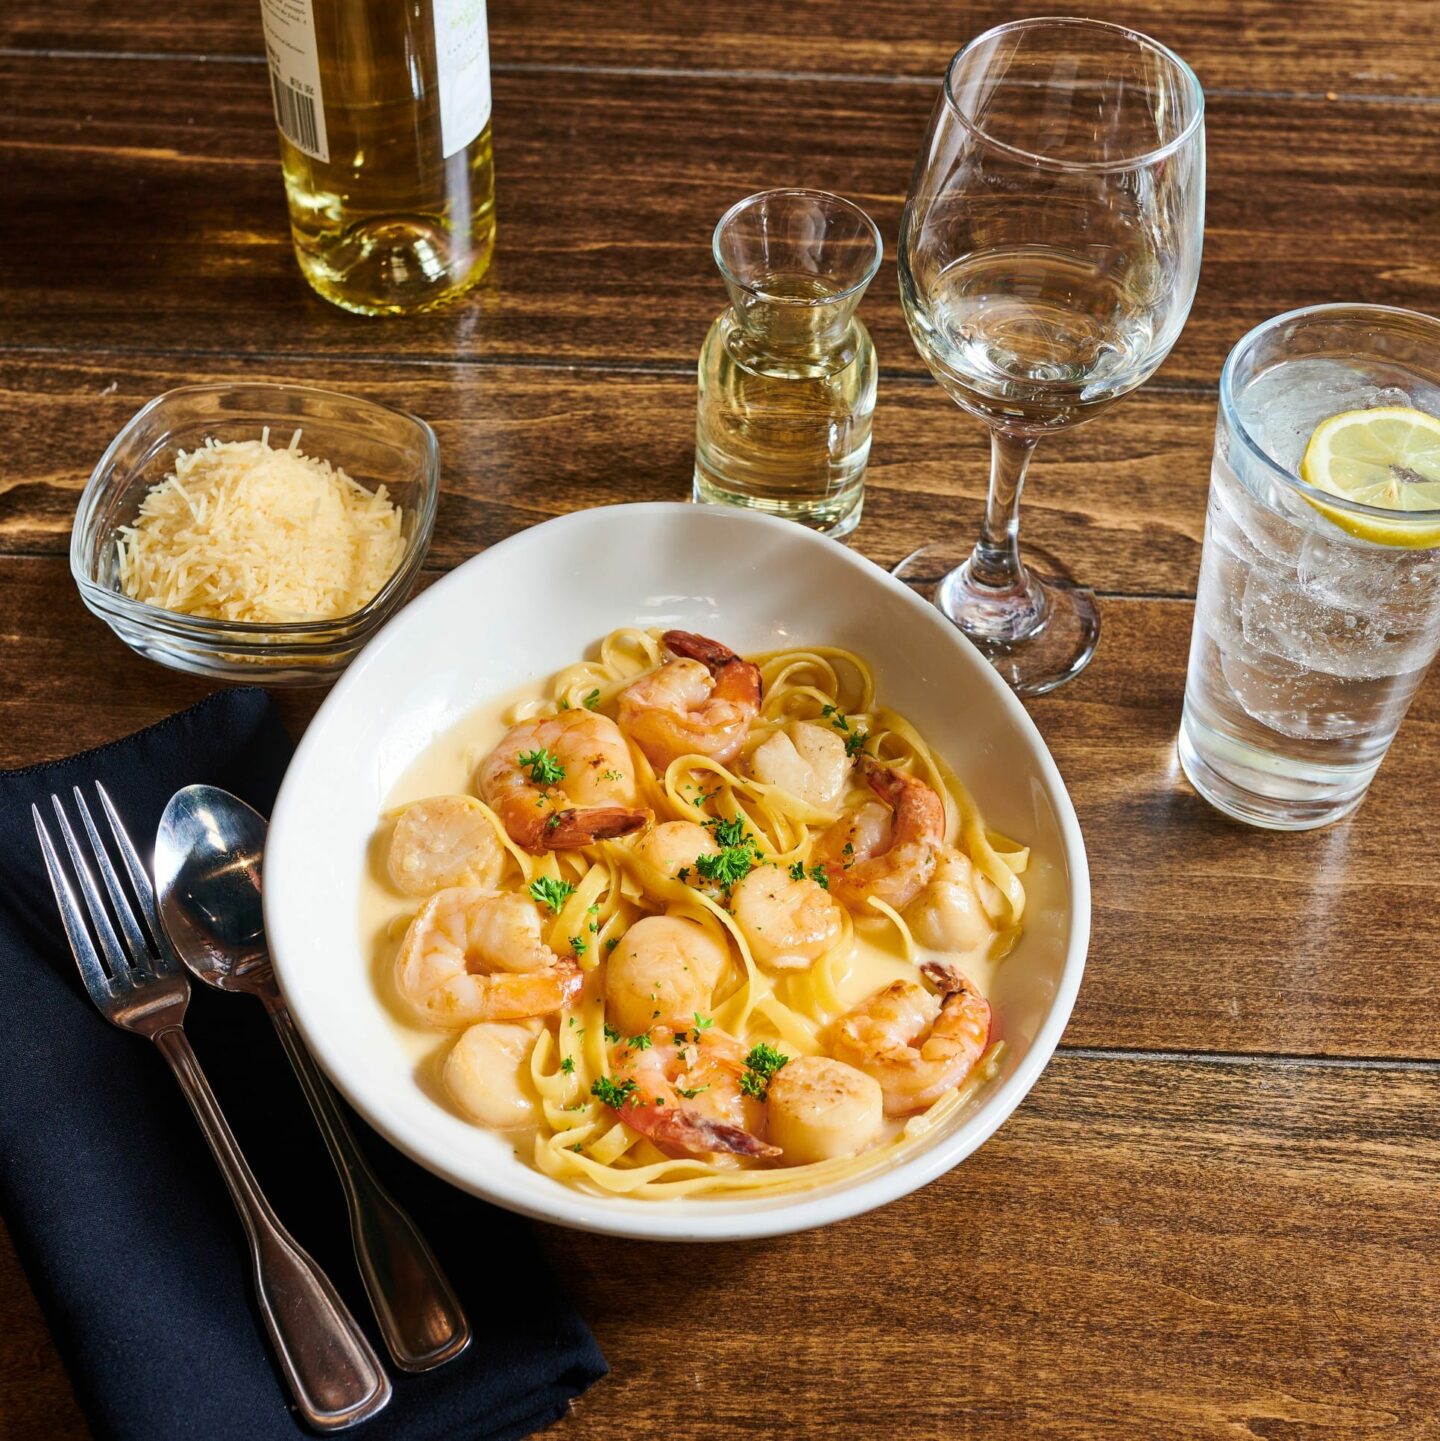 Seafood Fettuccine from Strizzi's photographed alongside a glass of white wine